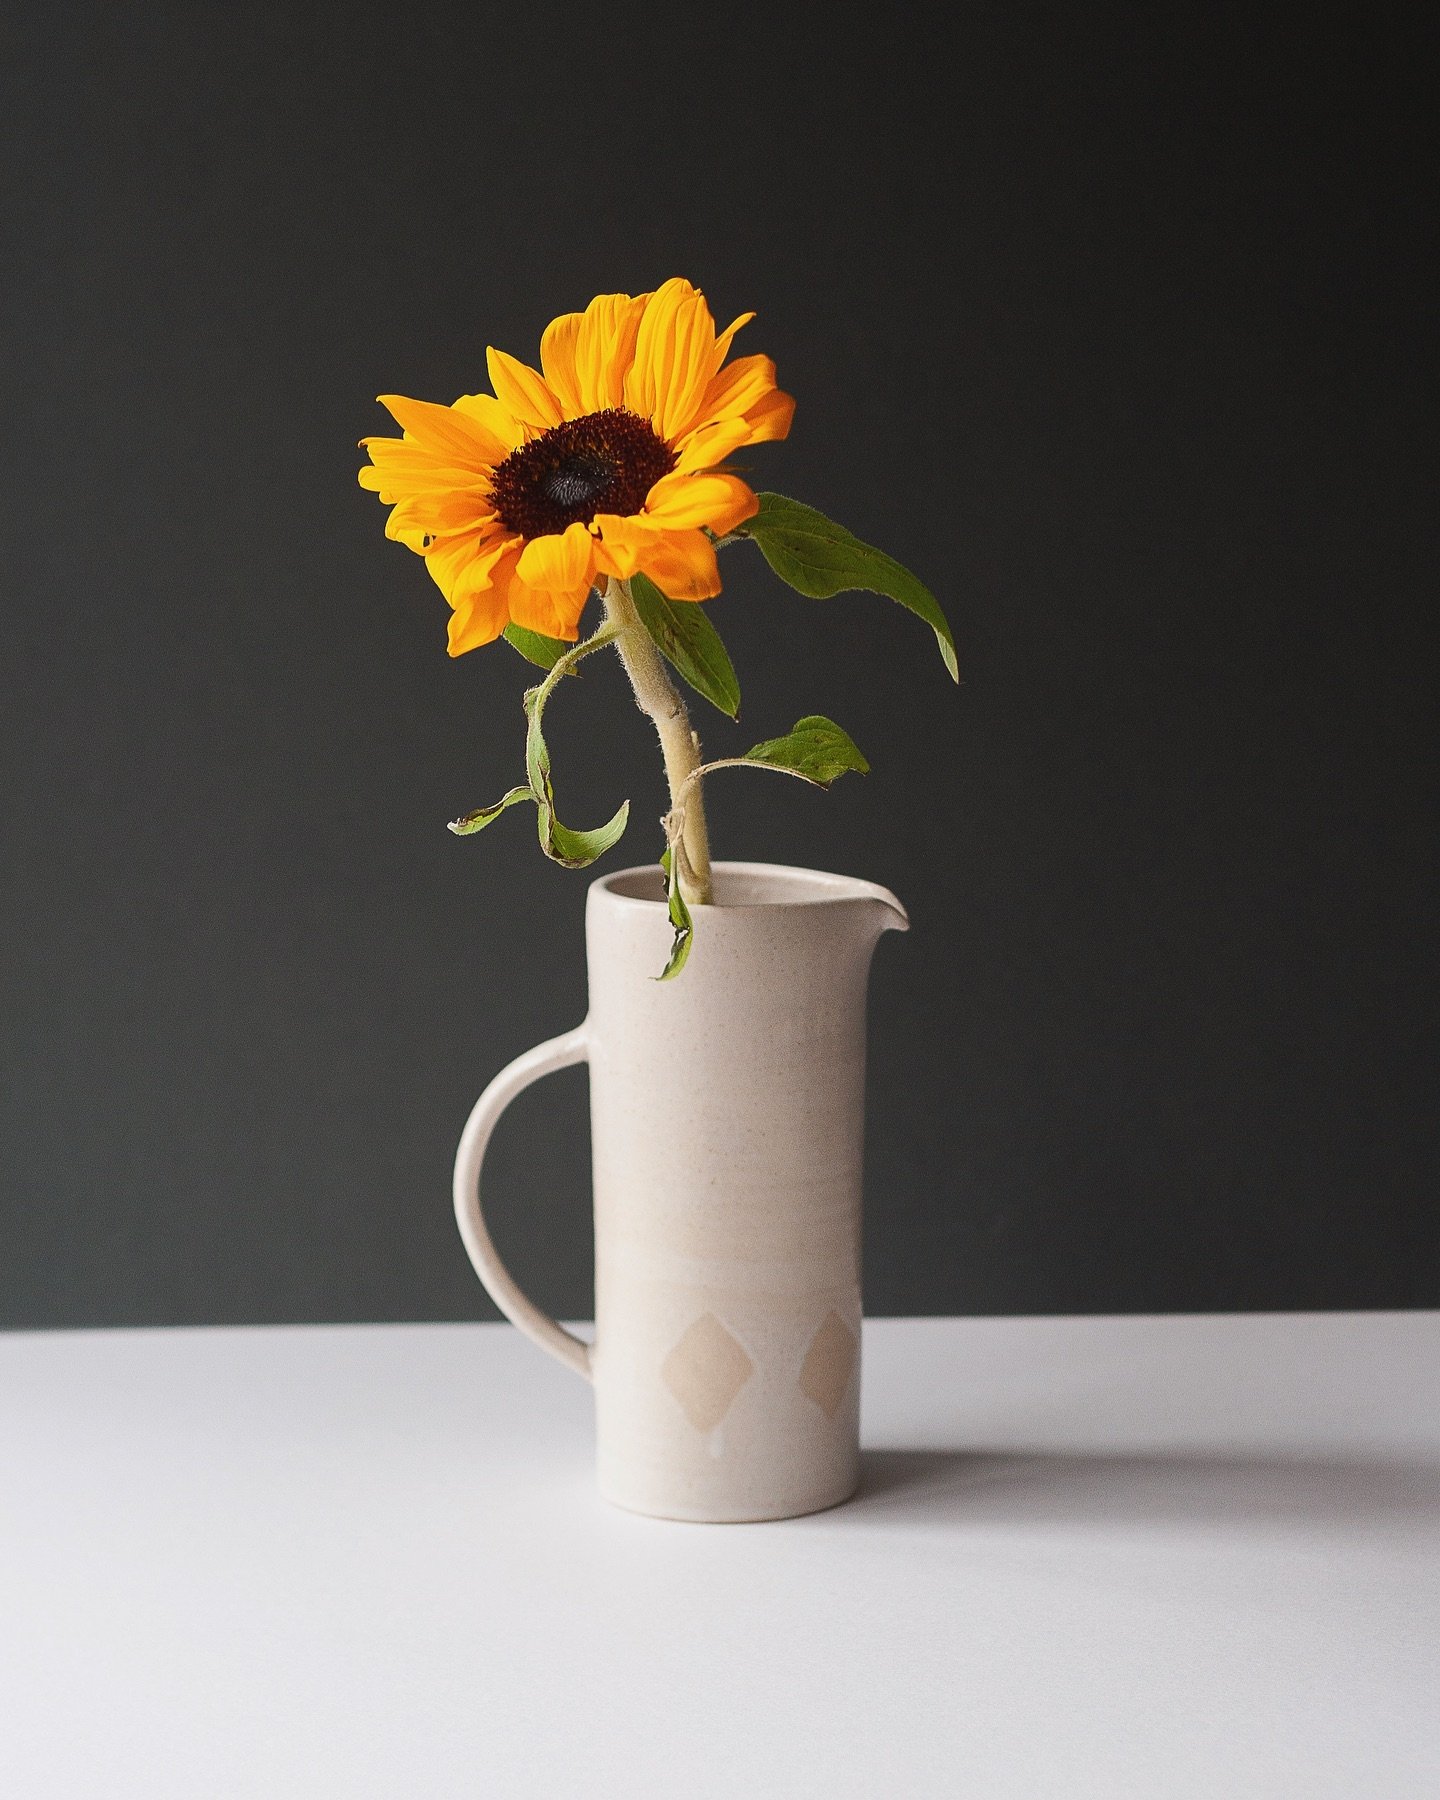 Cworr its time for flower season 

One of a kind jugs like this one will be available through my website next week!